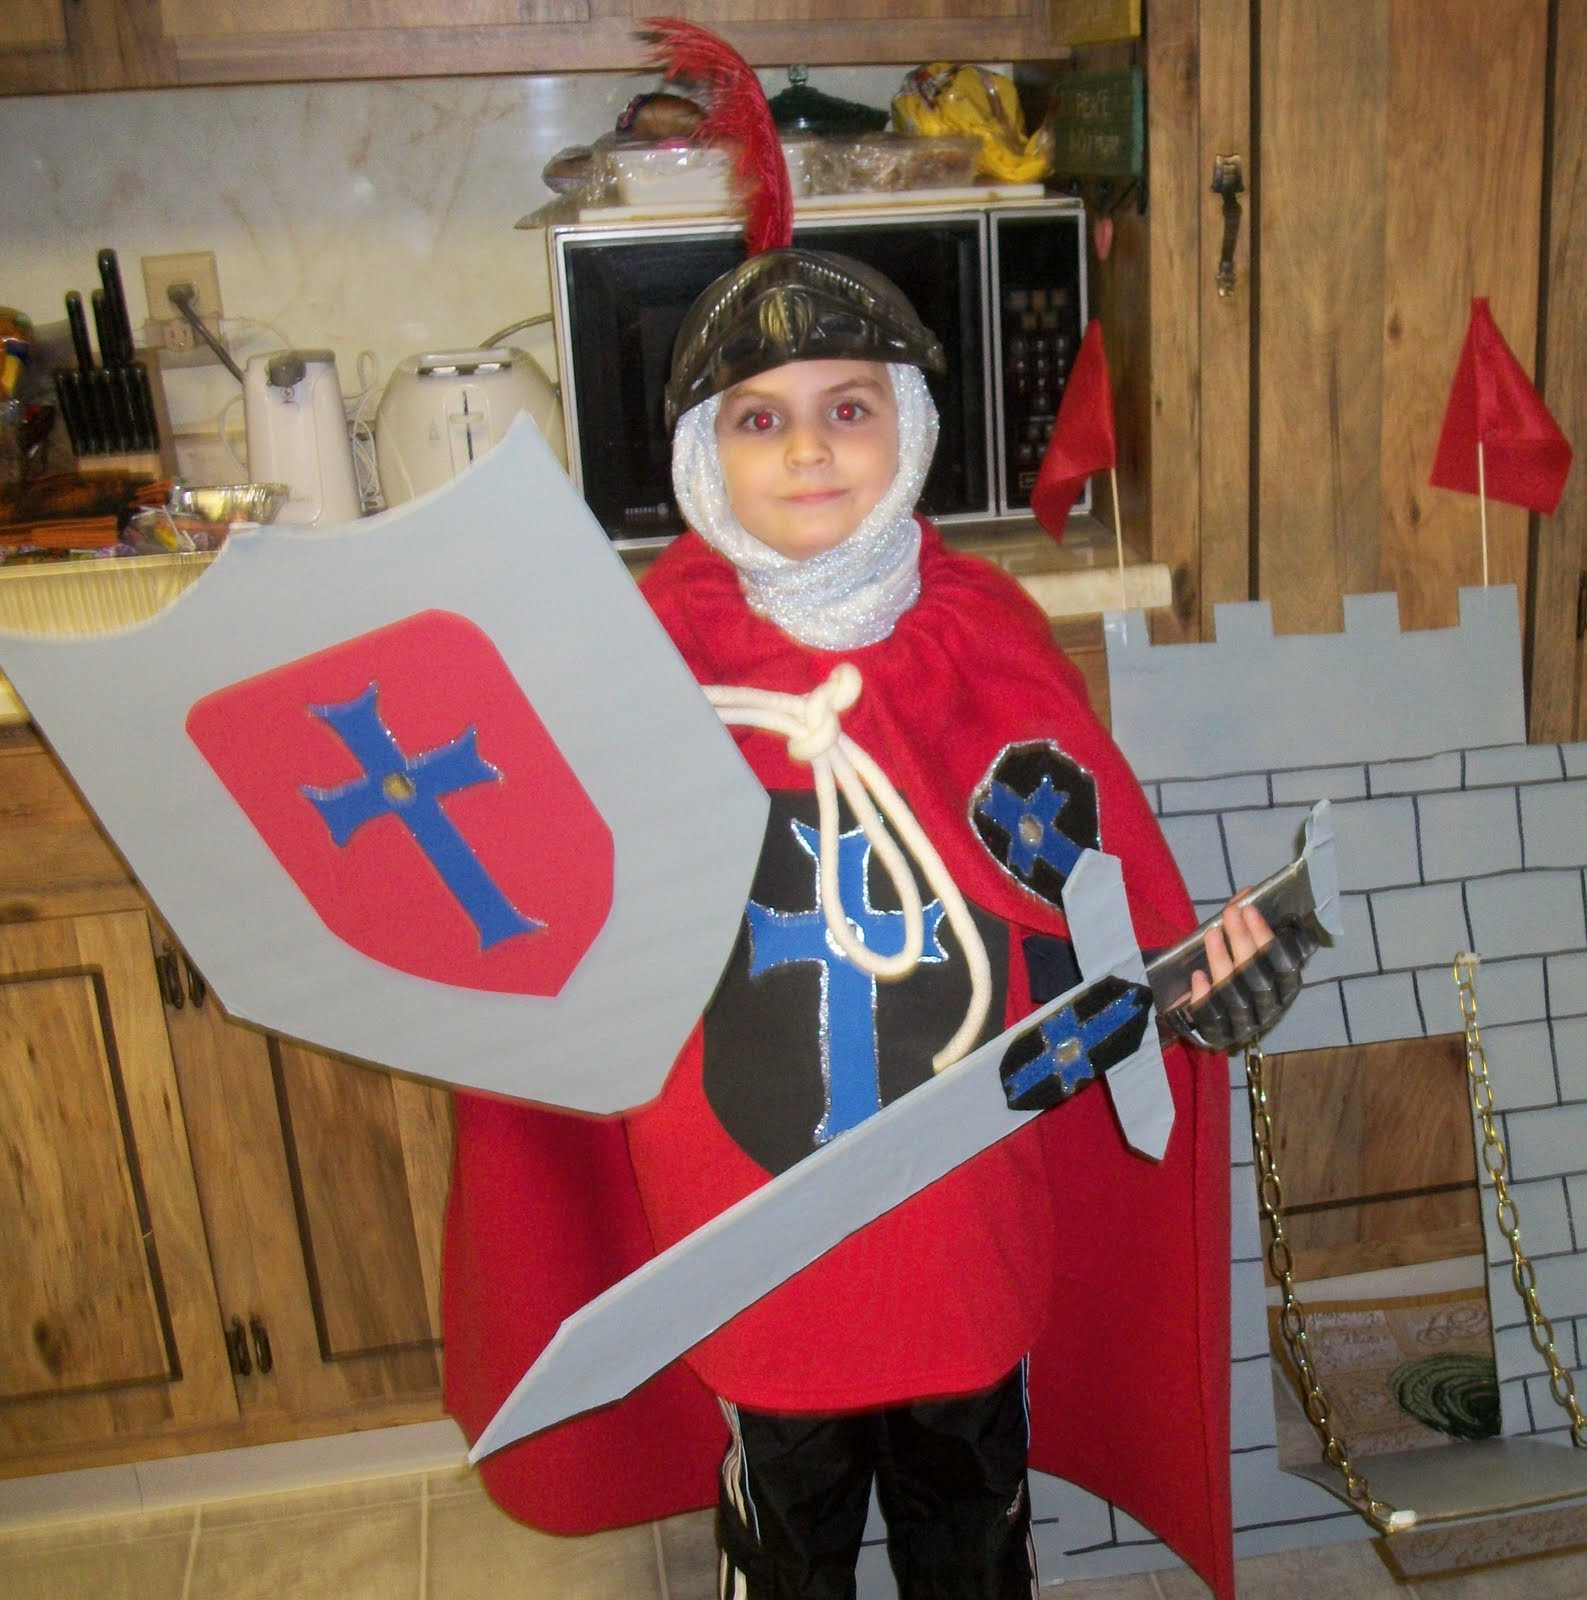 DIY Knight Costume
 Super mom without a cape Homemade No Sew Knight Costume